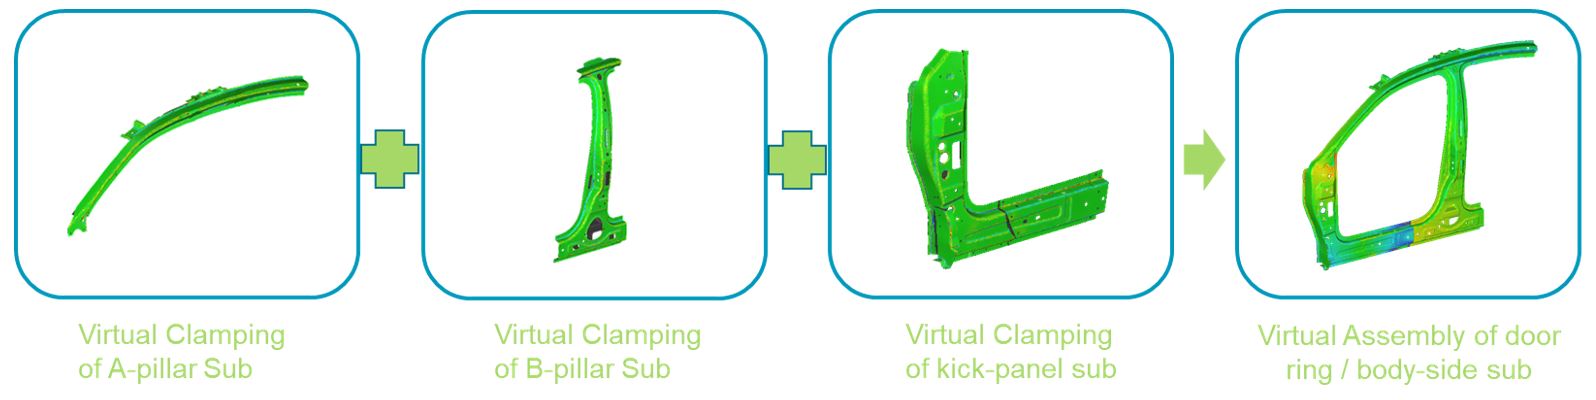 Virtual Assembly Workflow